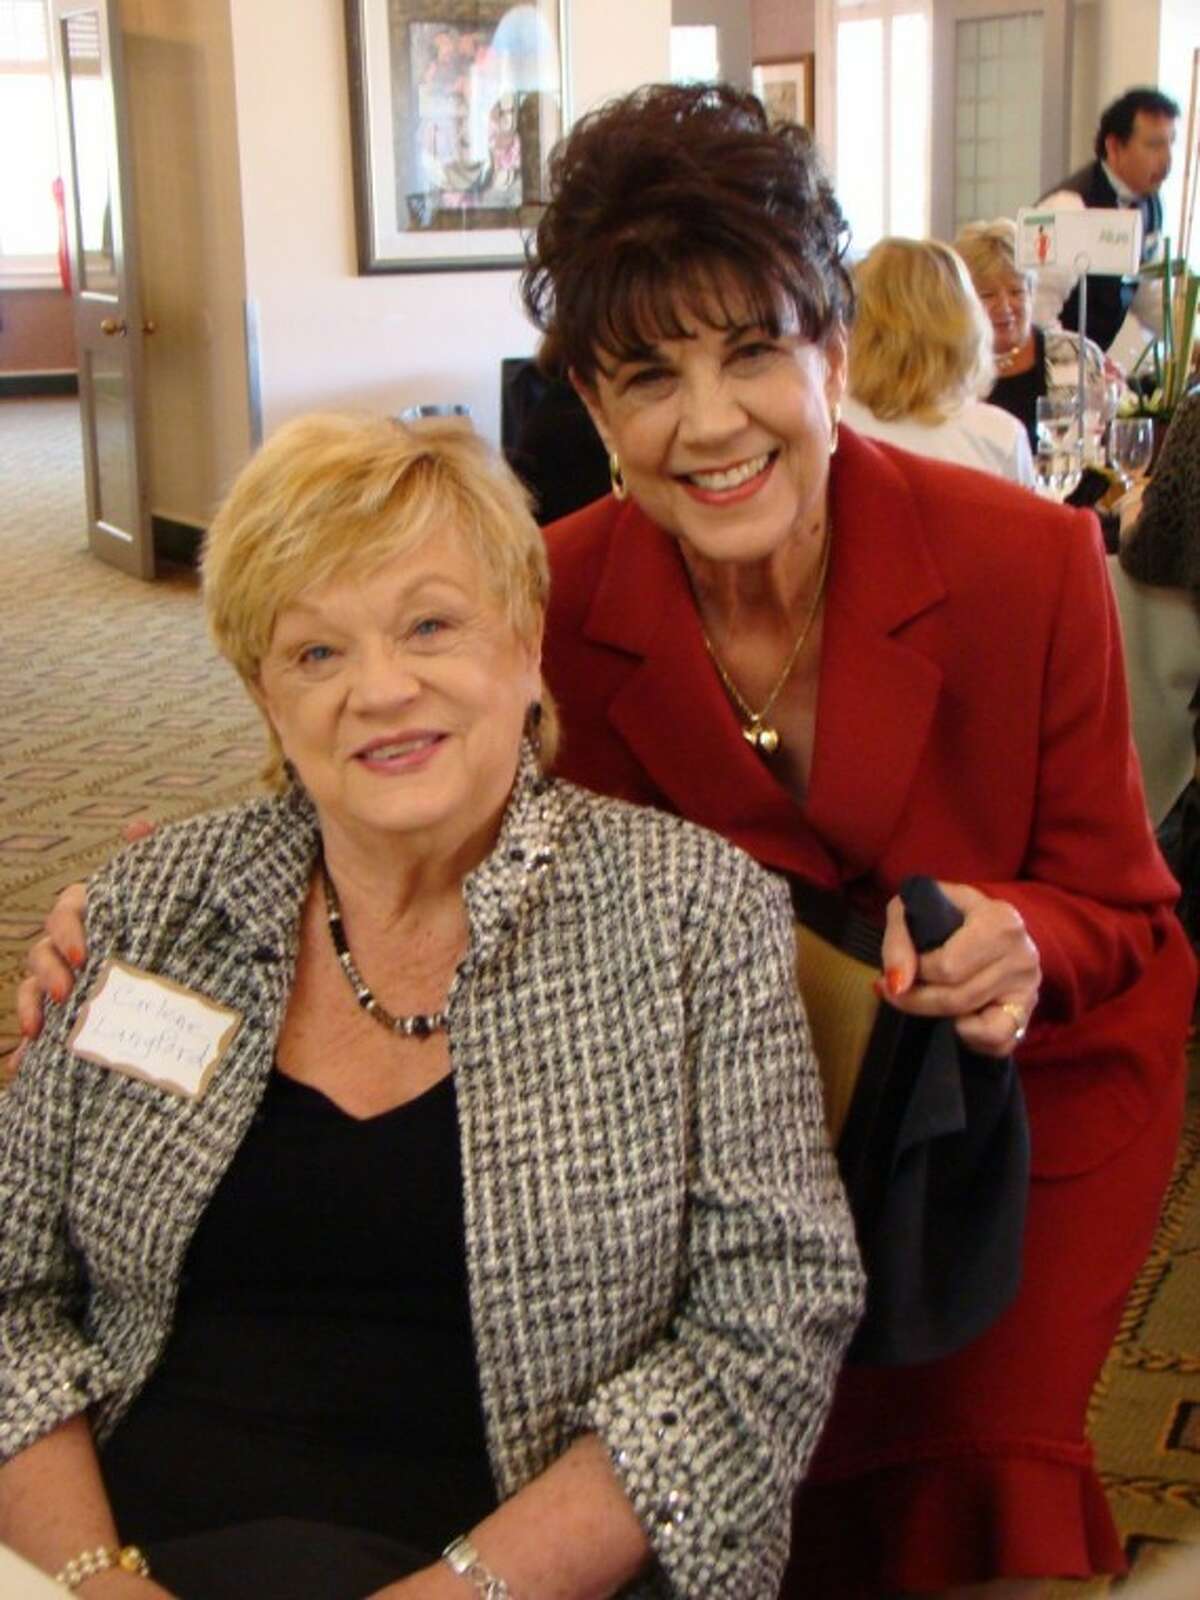 Bay Oaks Women's Association President Janet Greenwood, right, is happy to see Carlene Langford as she mingles with the crowd at the March luncheon.